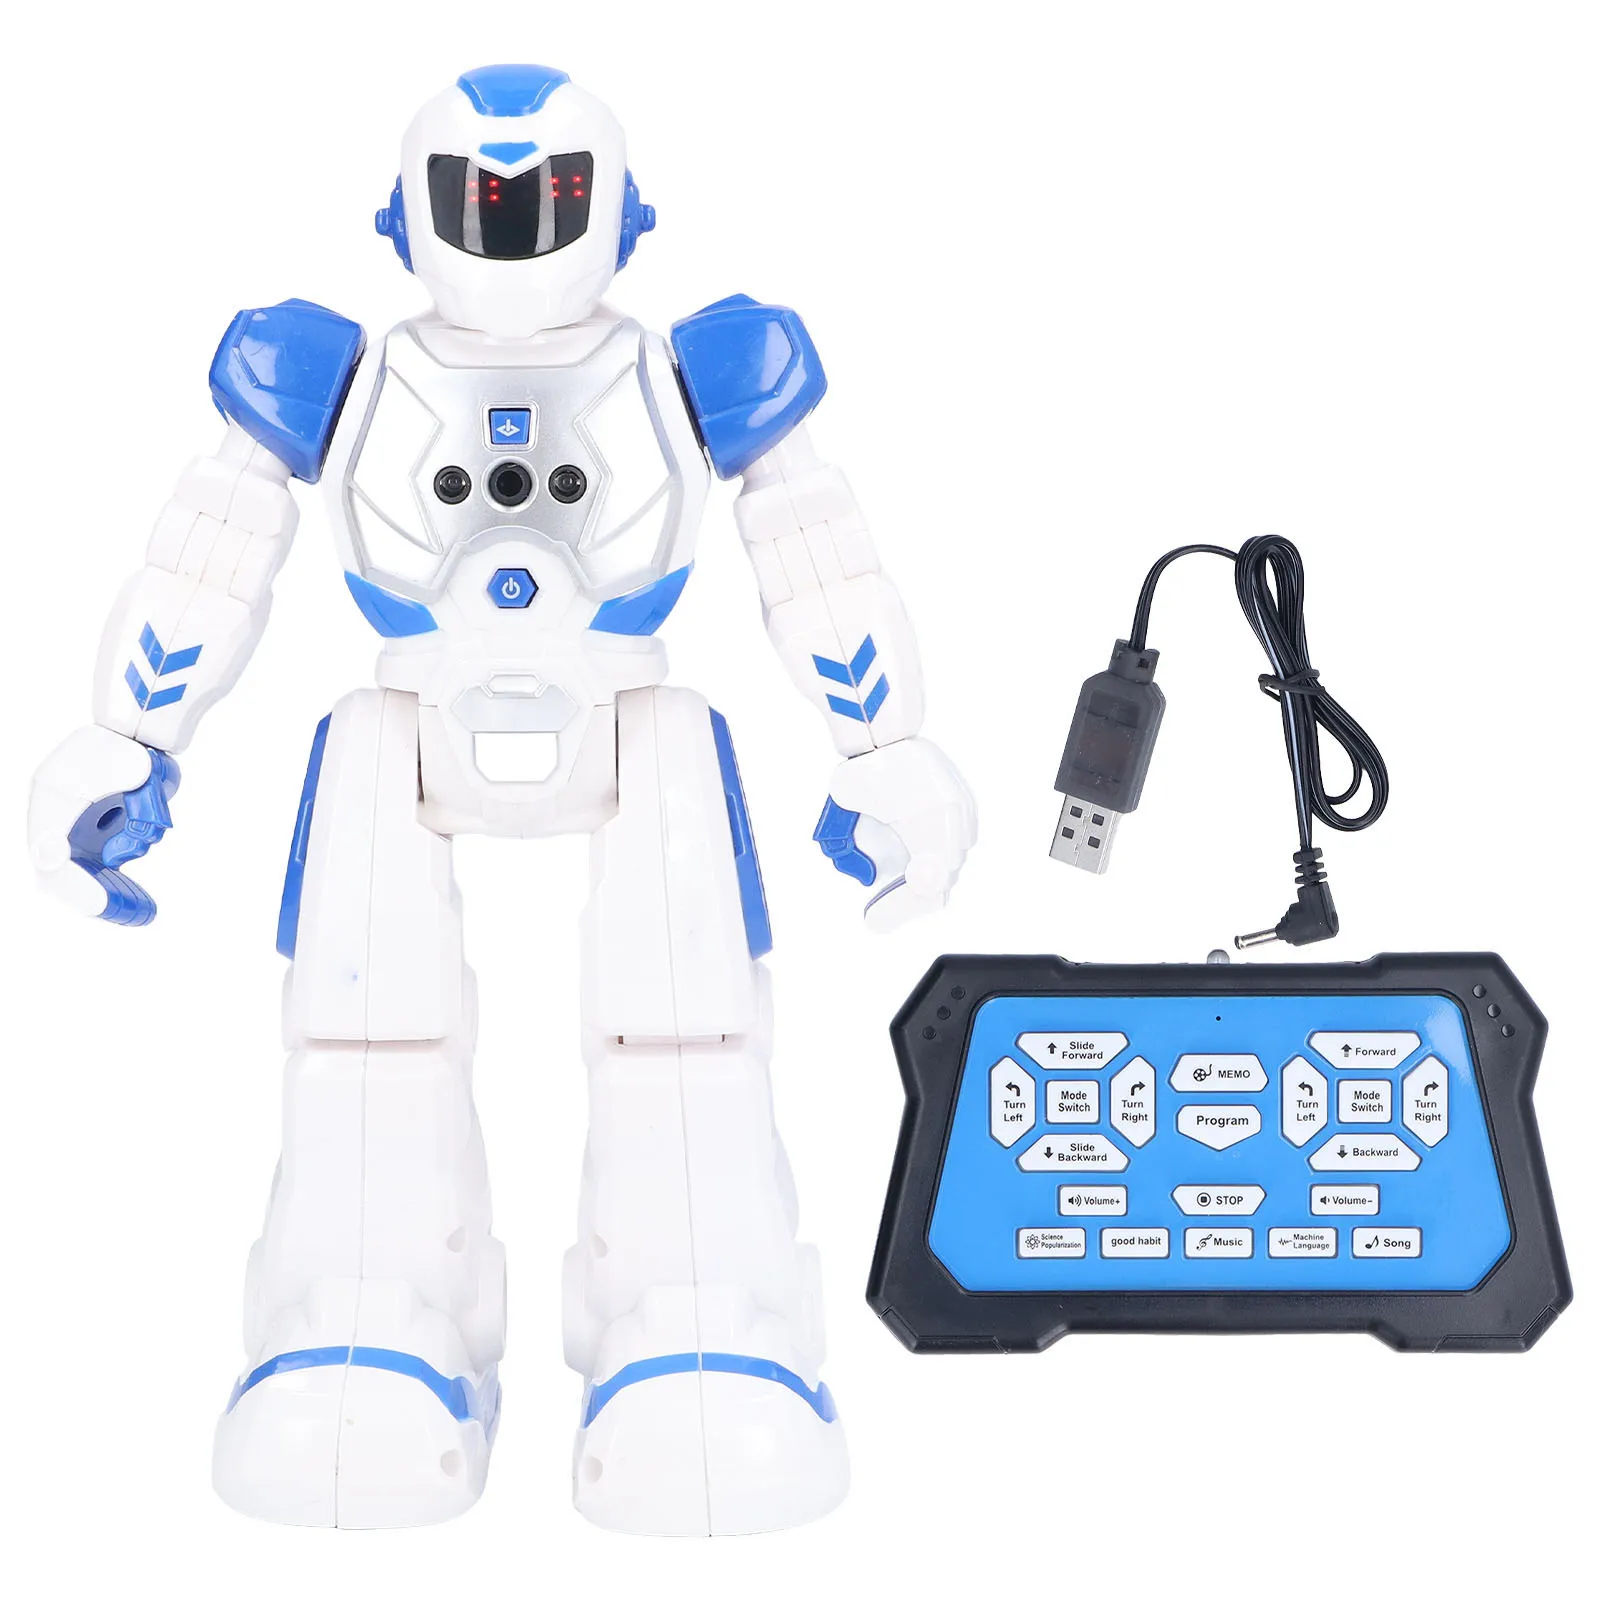 

Remote Control Robot Toy Mini Smart Walking Robot Toy Movable Joints Infrared Hand Signal Sensing Robot Toy